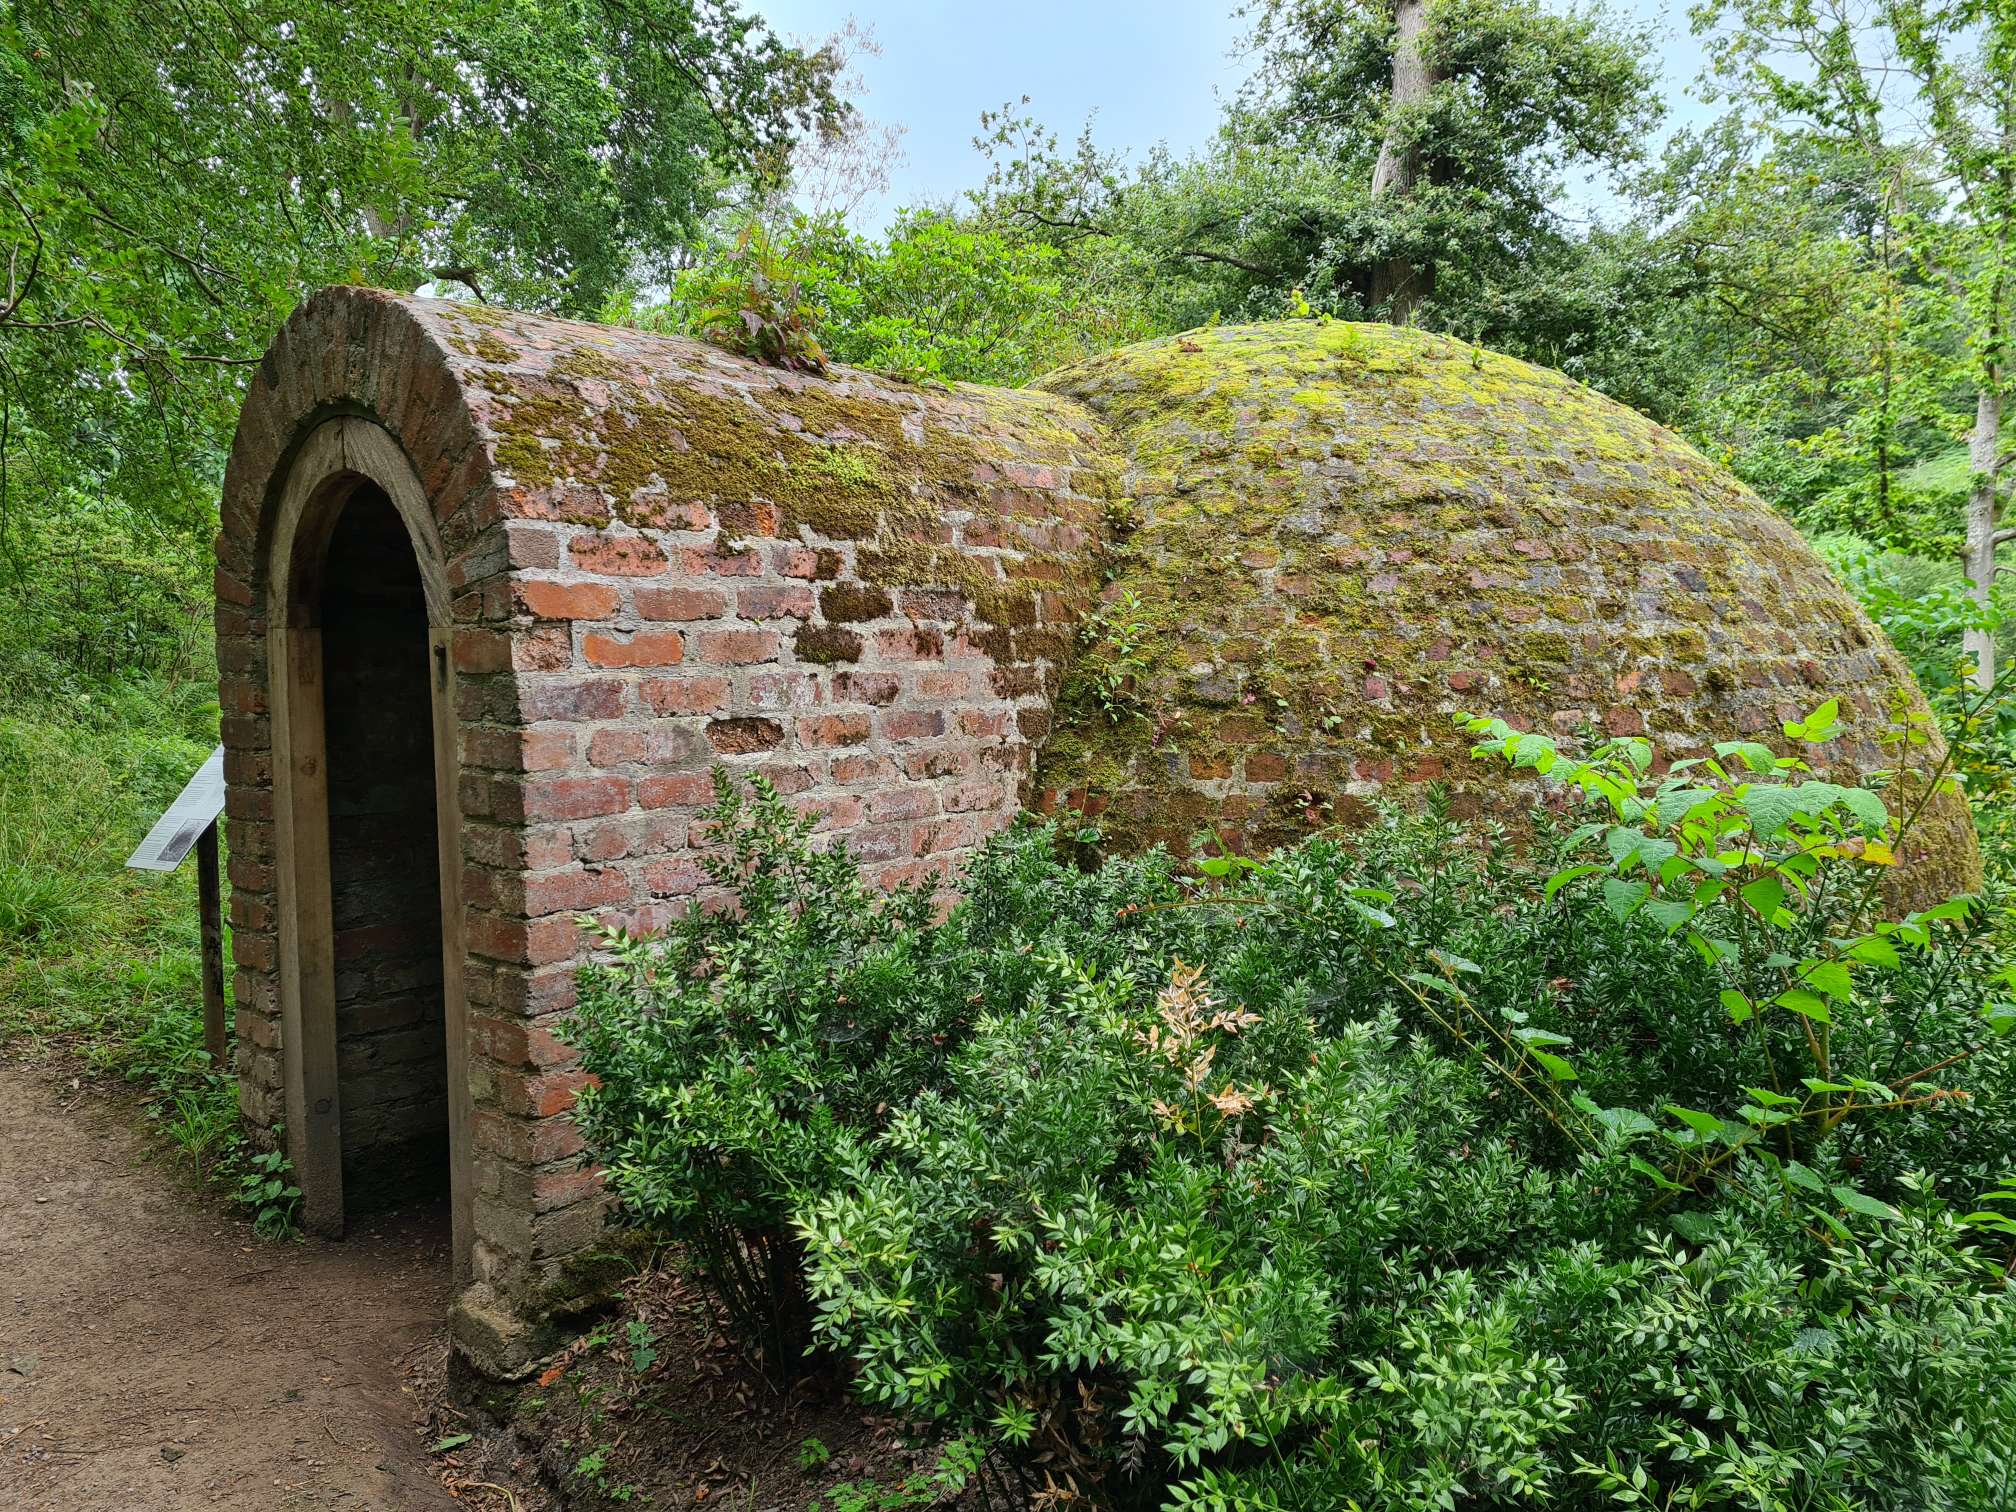 An old brick fridge in the grounds of Powis Castle